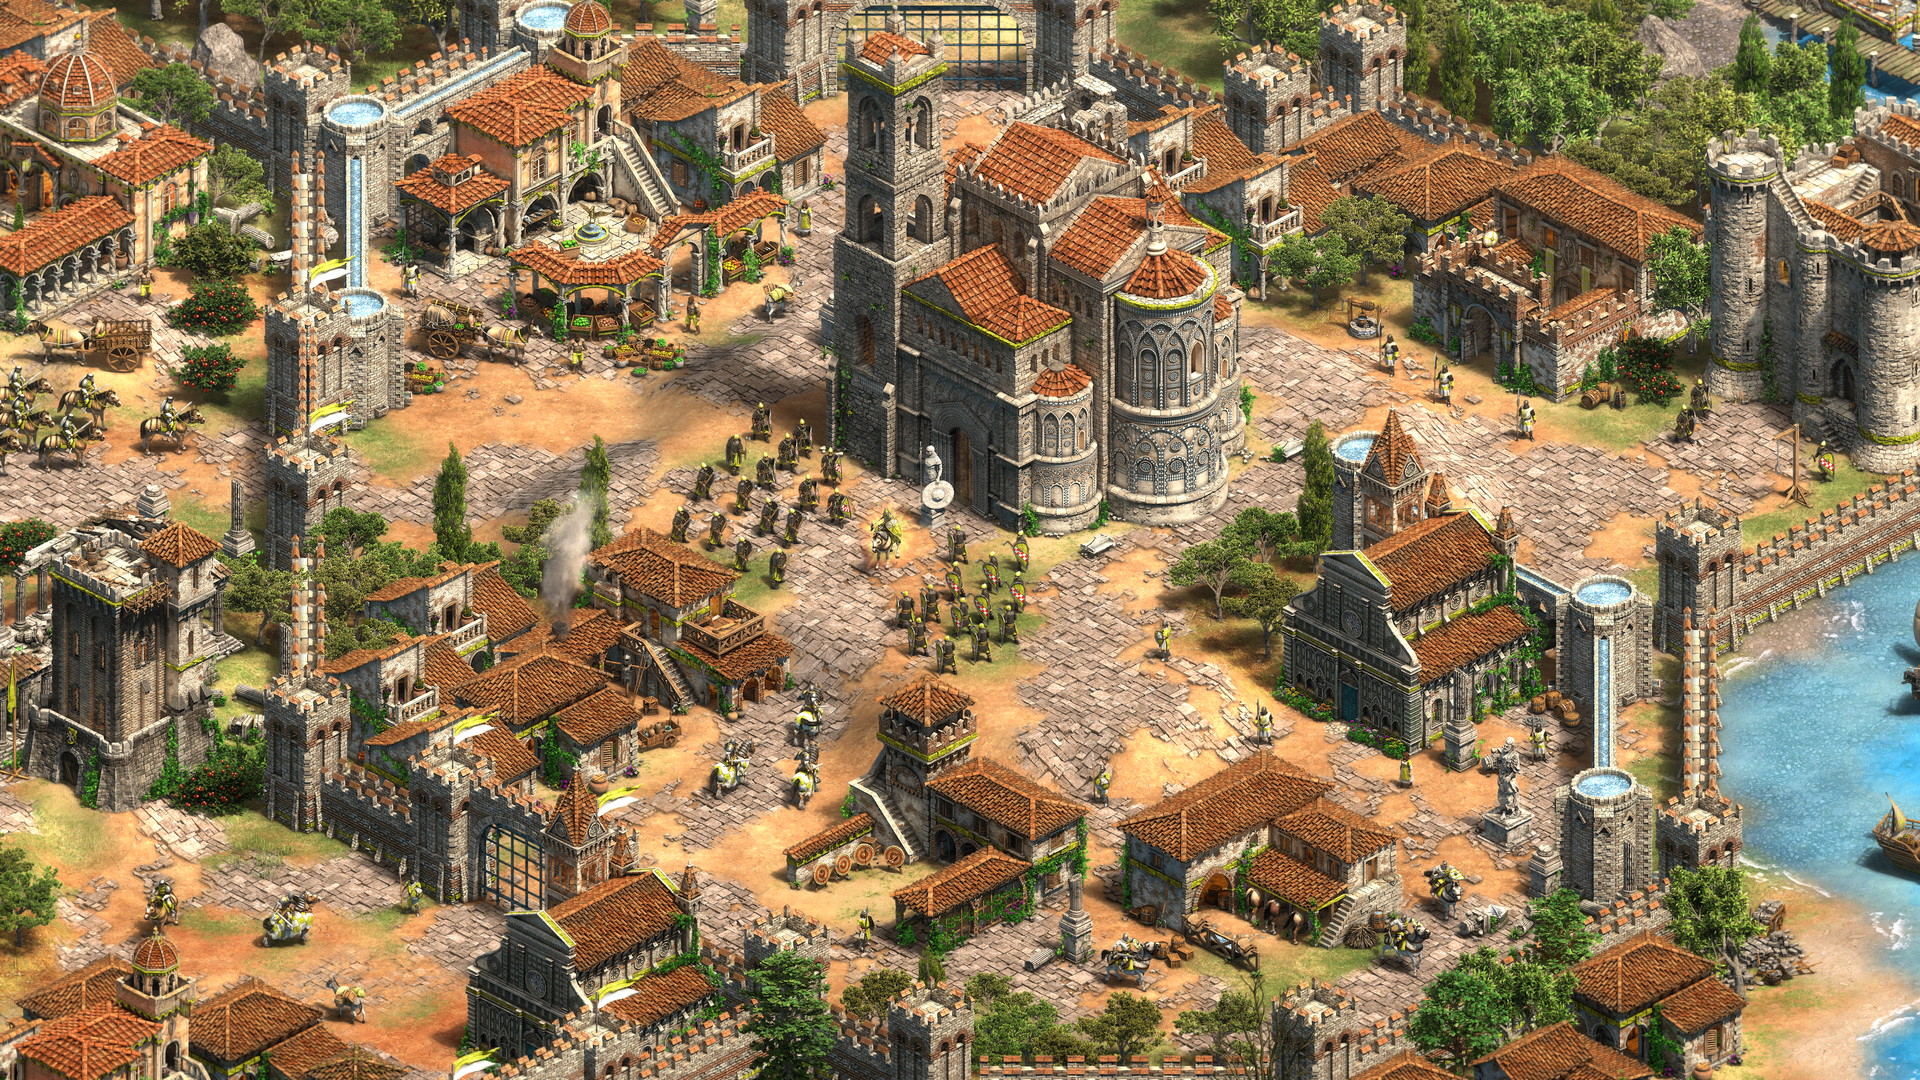 Age of Empires II: Definitive Edition - Lords of the West - screenshot 5